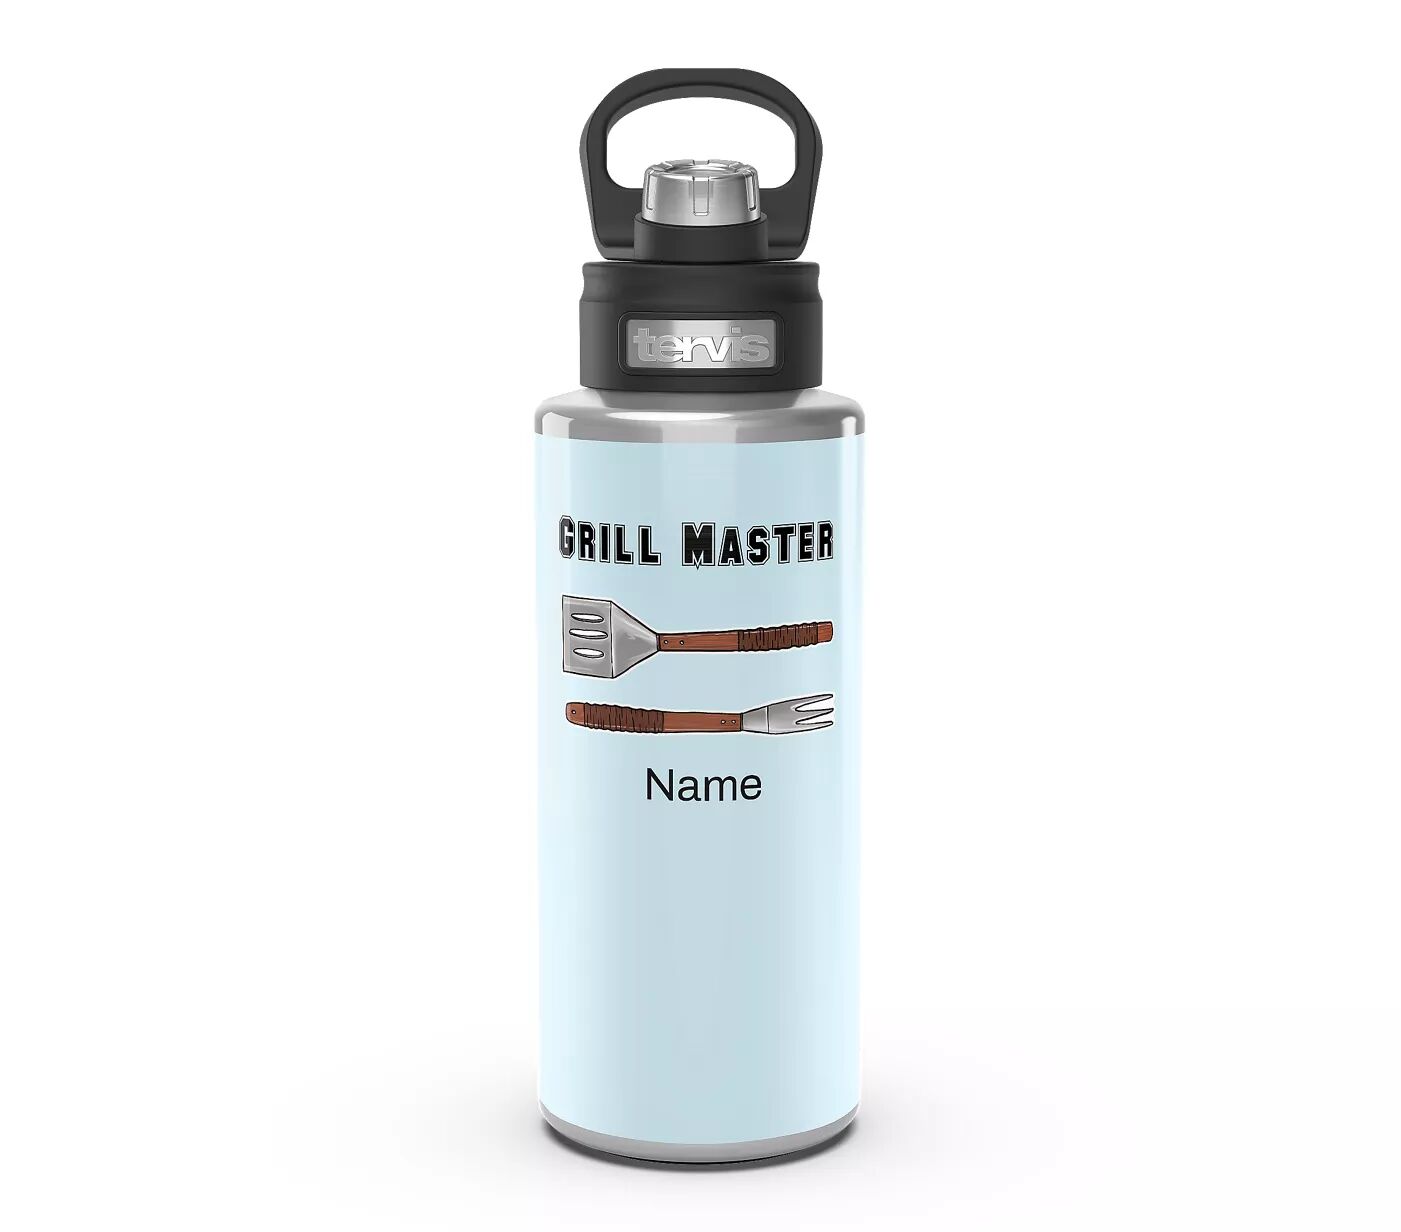 Tervis Grill Master Wide Mouth Bottles, 32 oz